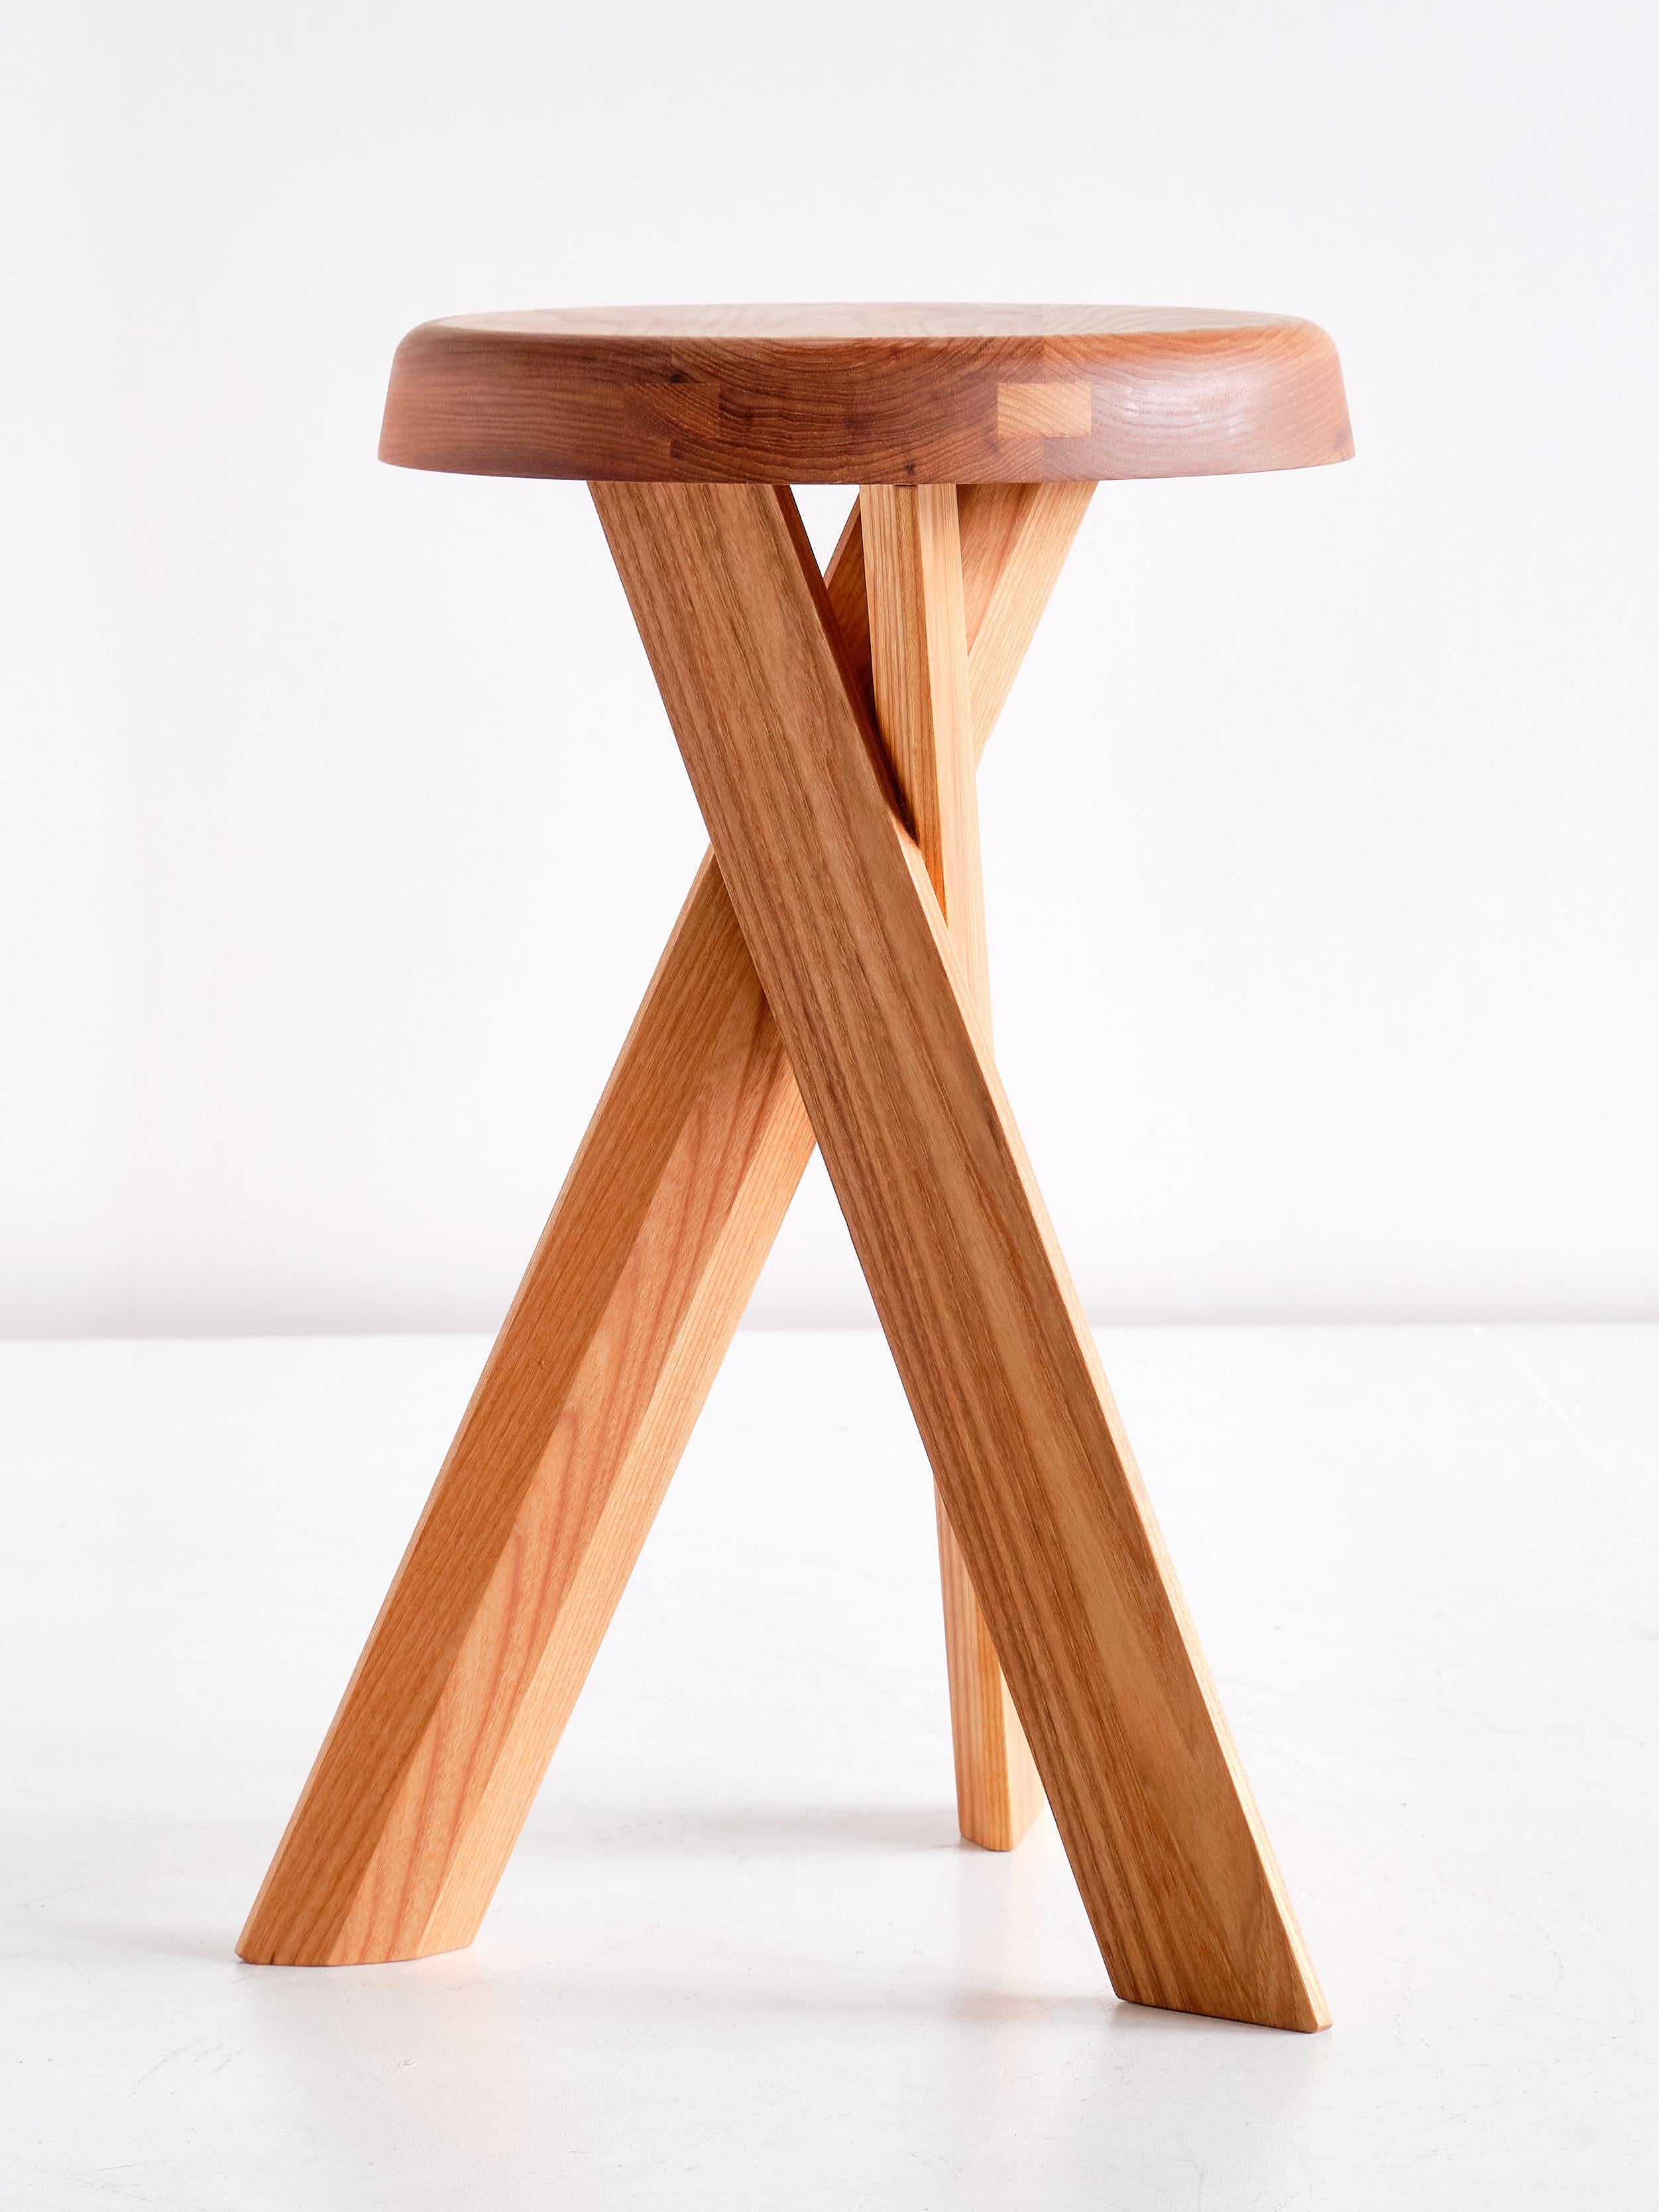 Pierre Chapo S31B Stool in Solid Elm, Chapo Creation, France 2